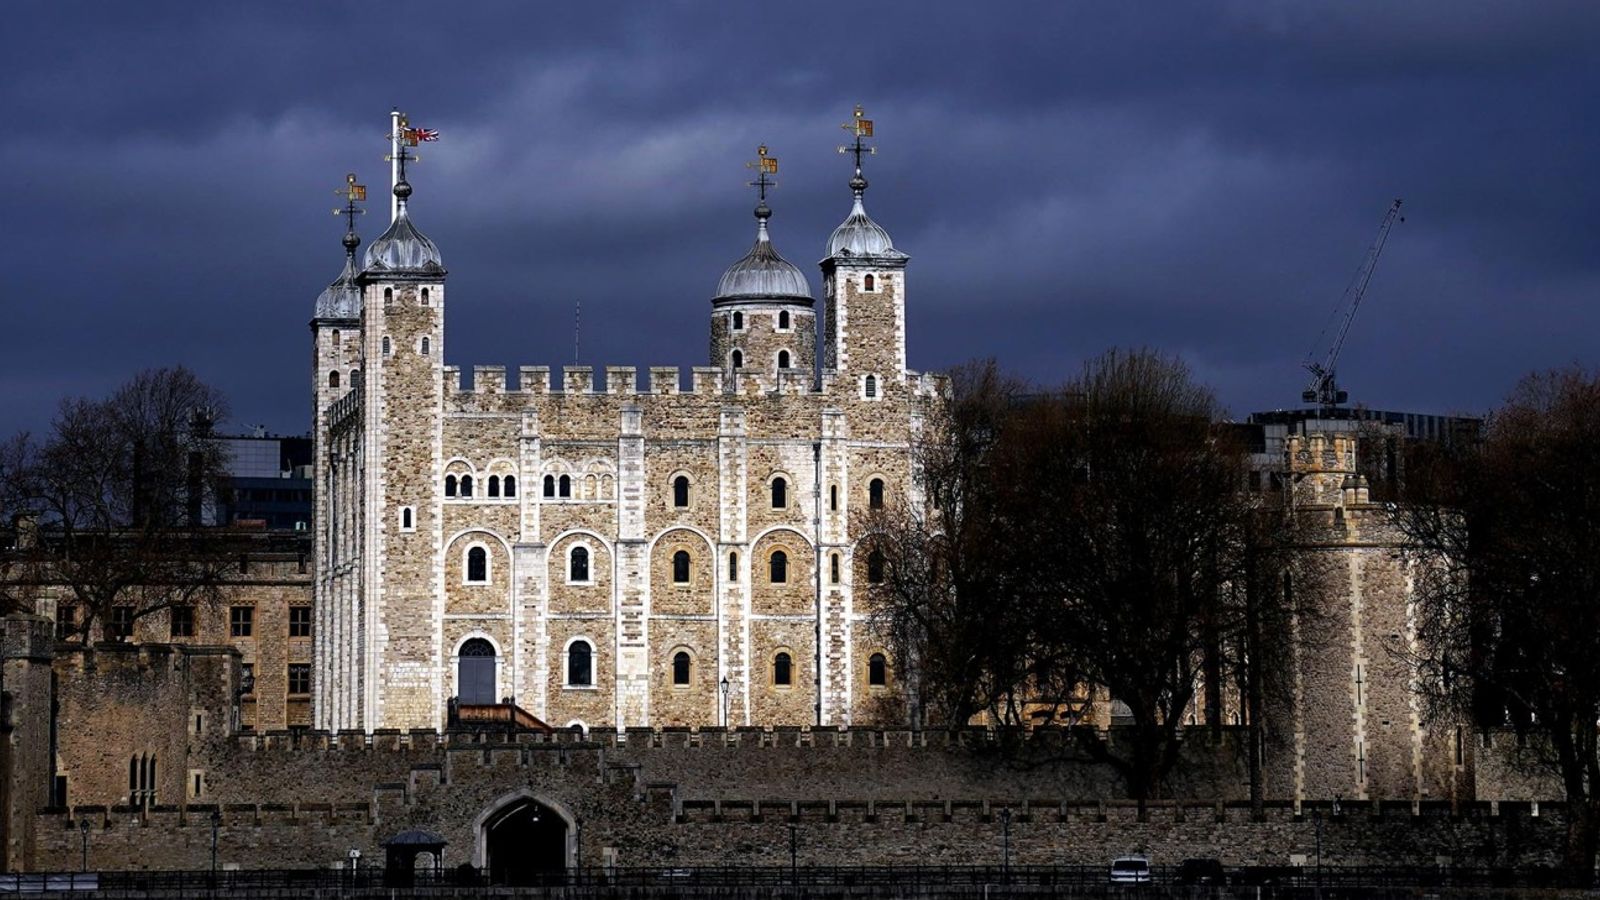 No coup for royal palaces as ministers restart search for next chair